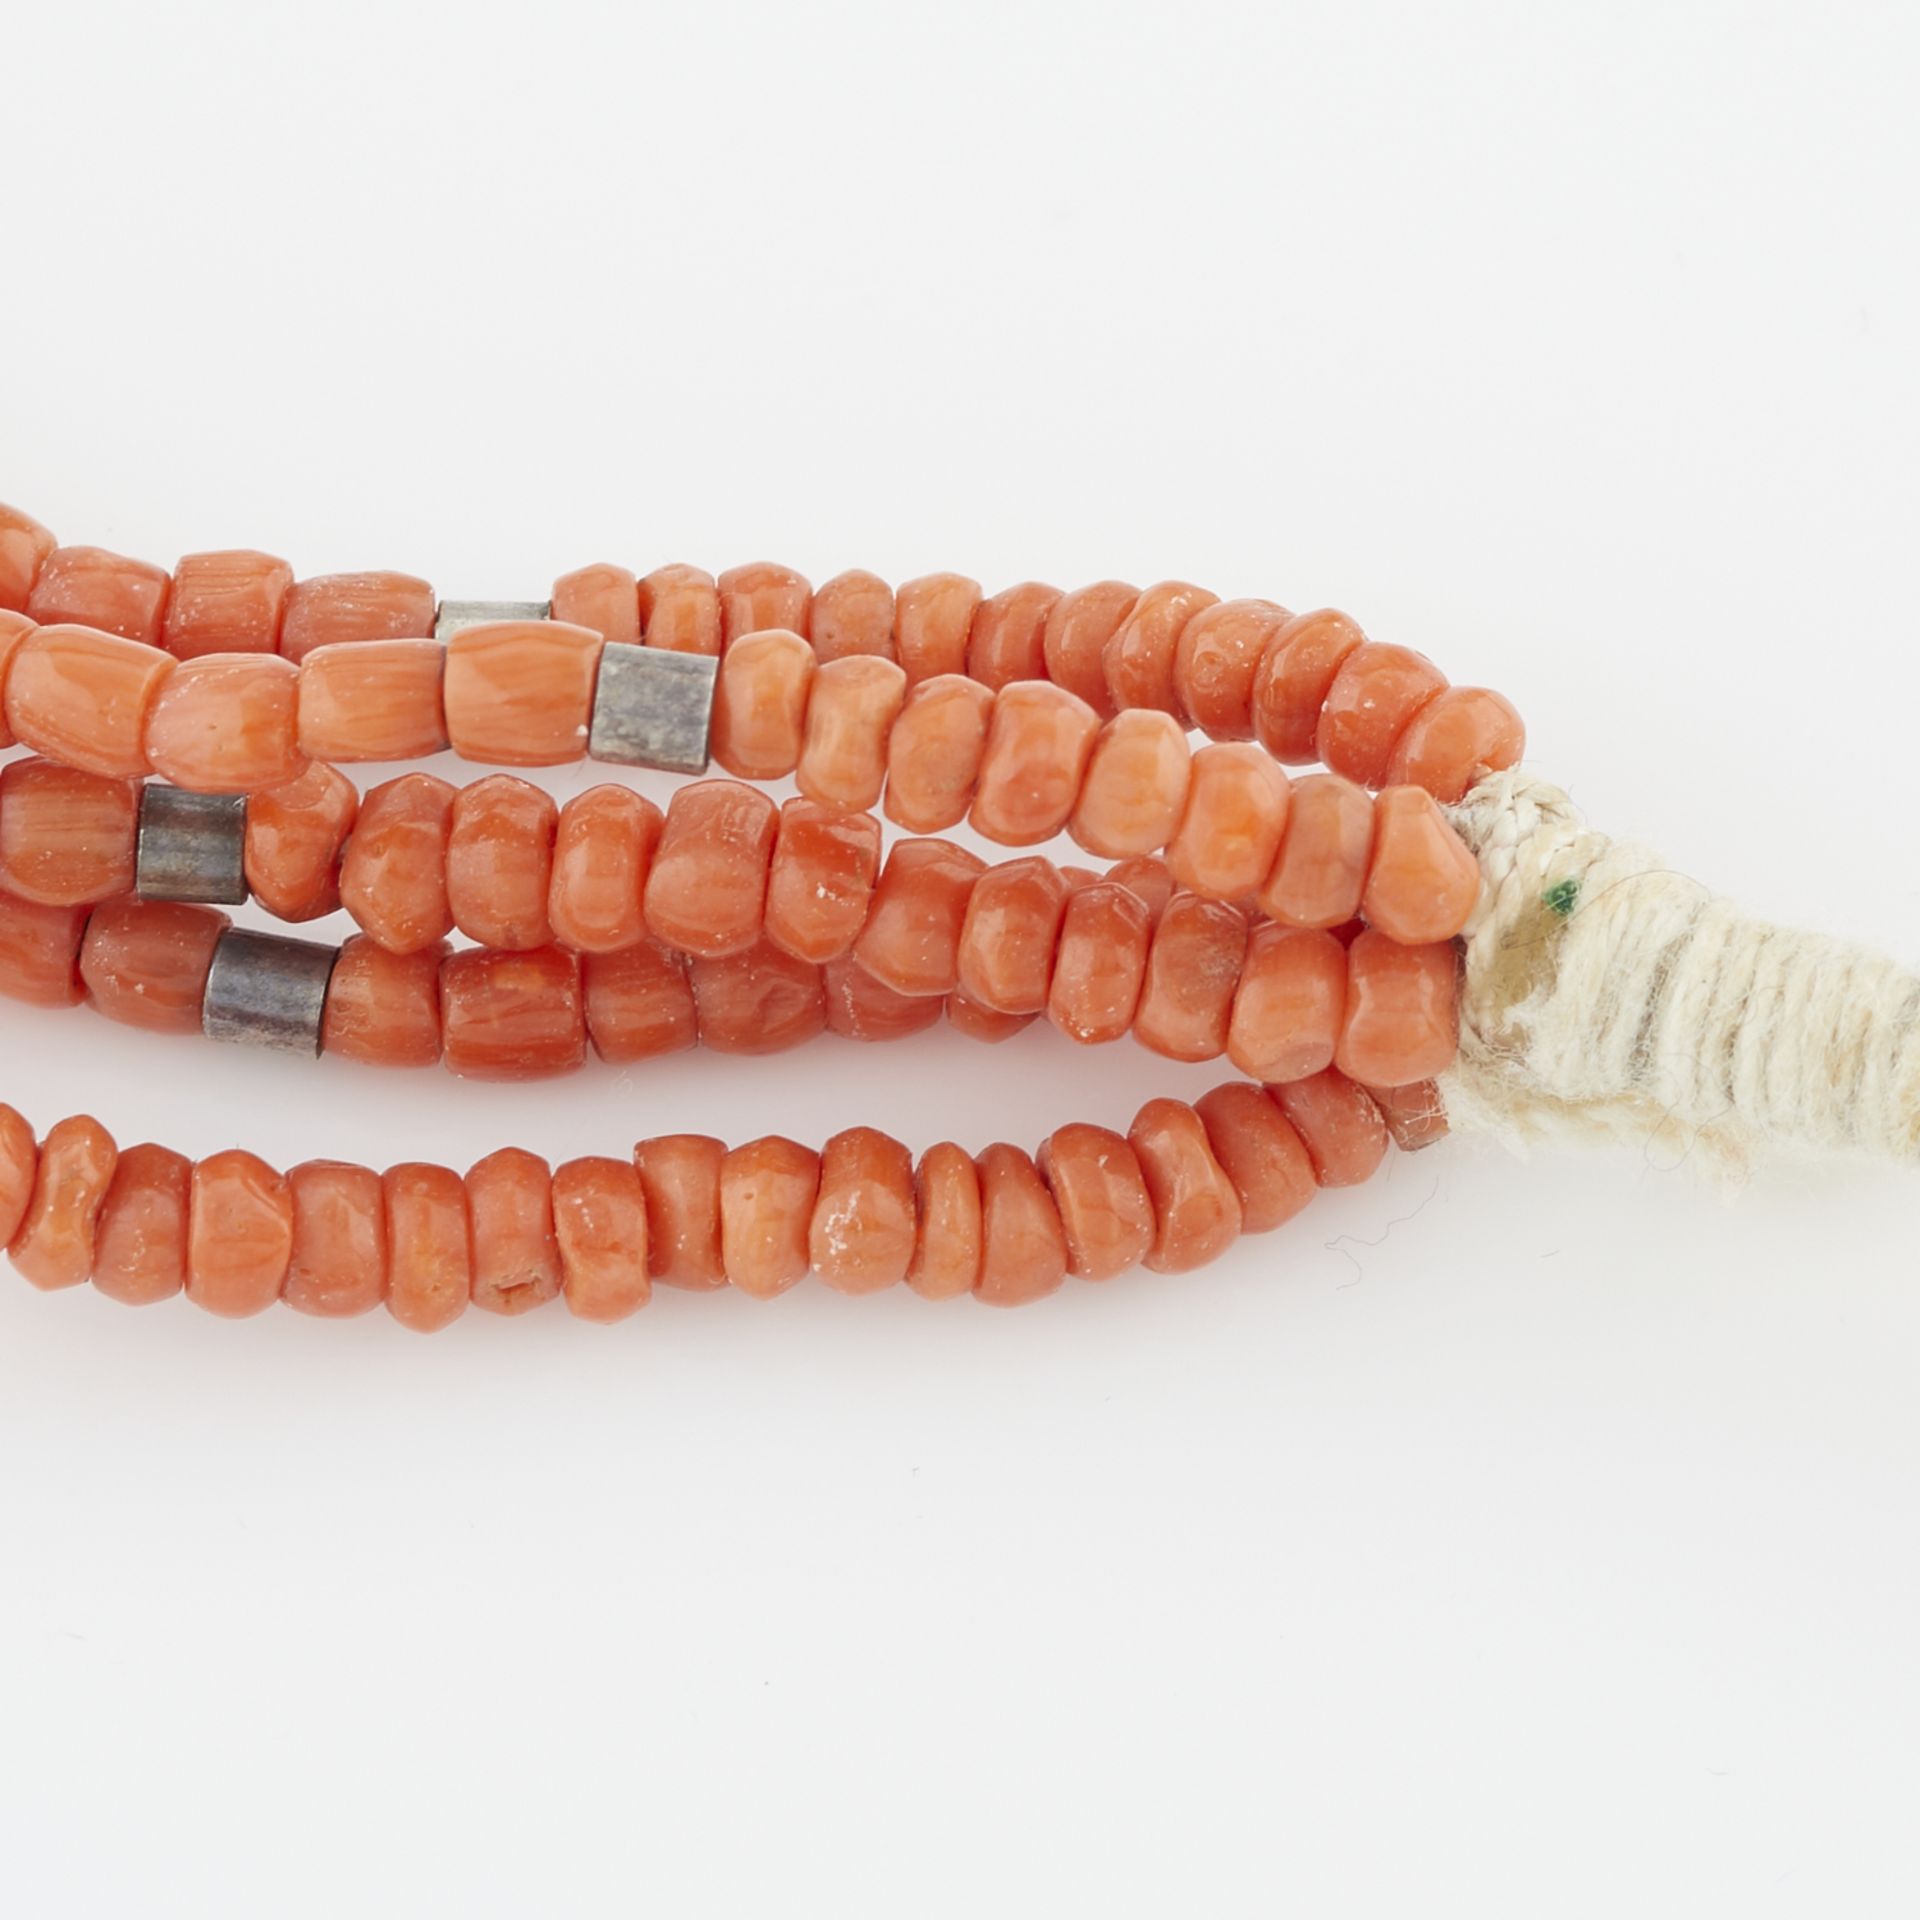 Five Strand Coral Heishi Necklace - Image 3 of 7